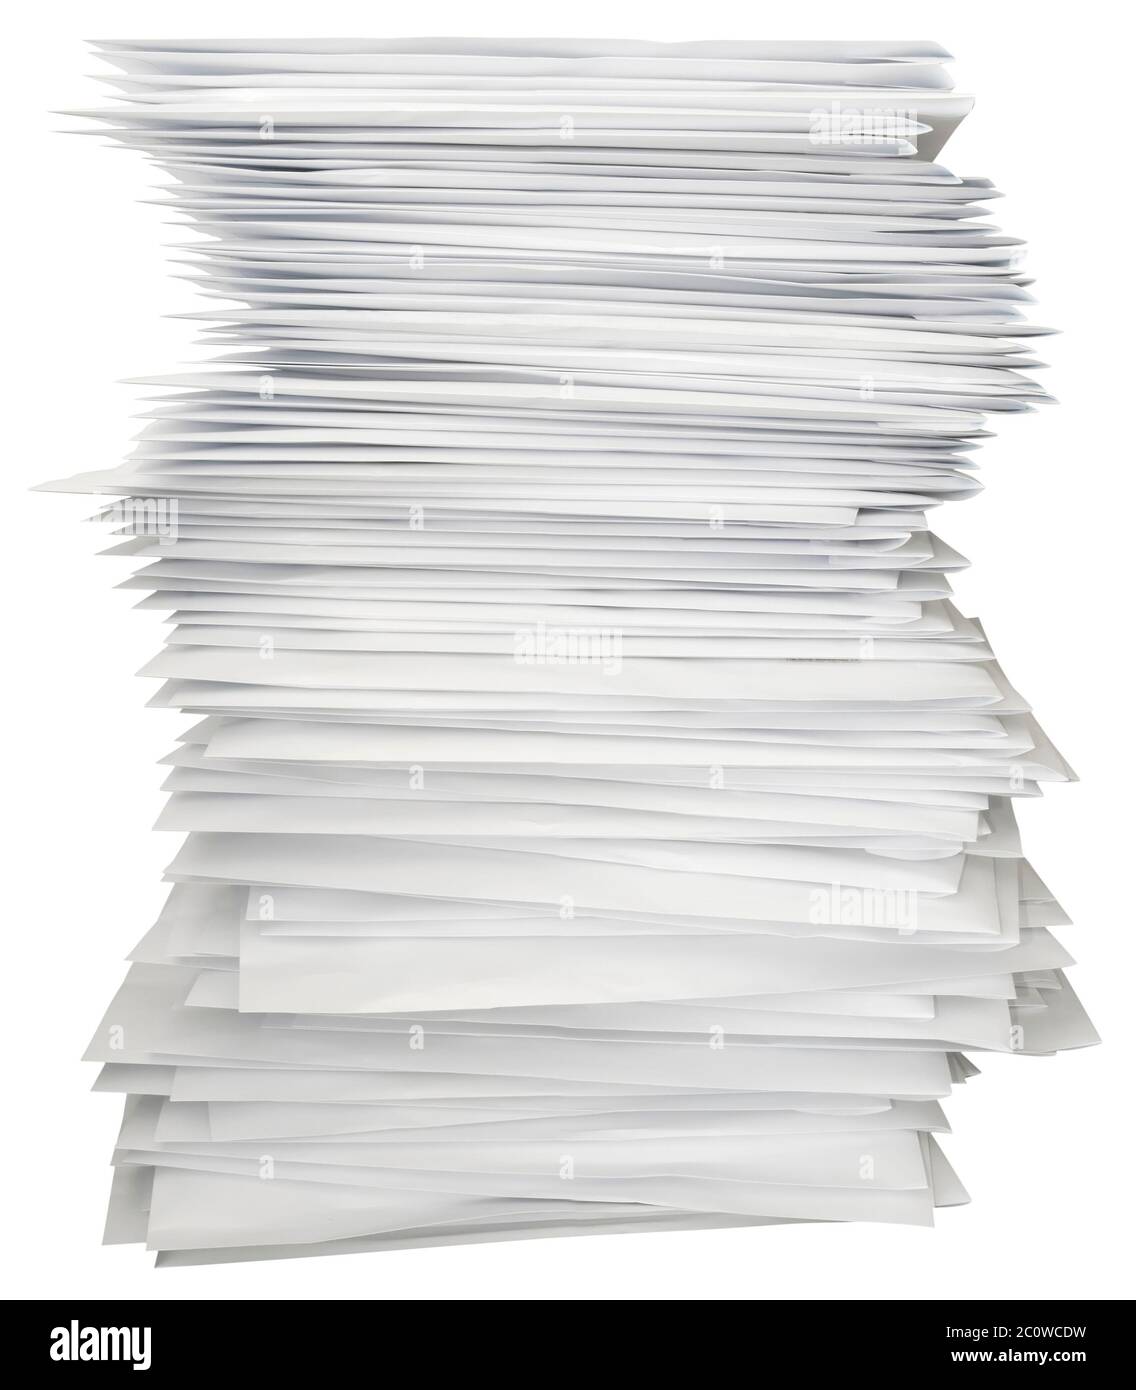 wait waiting letters stacked post paperwork bunch folders isolated Stock Photo